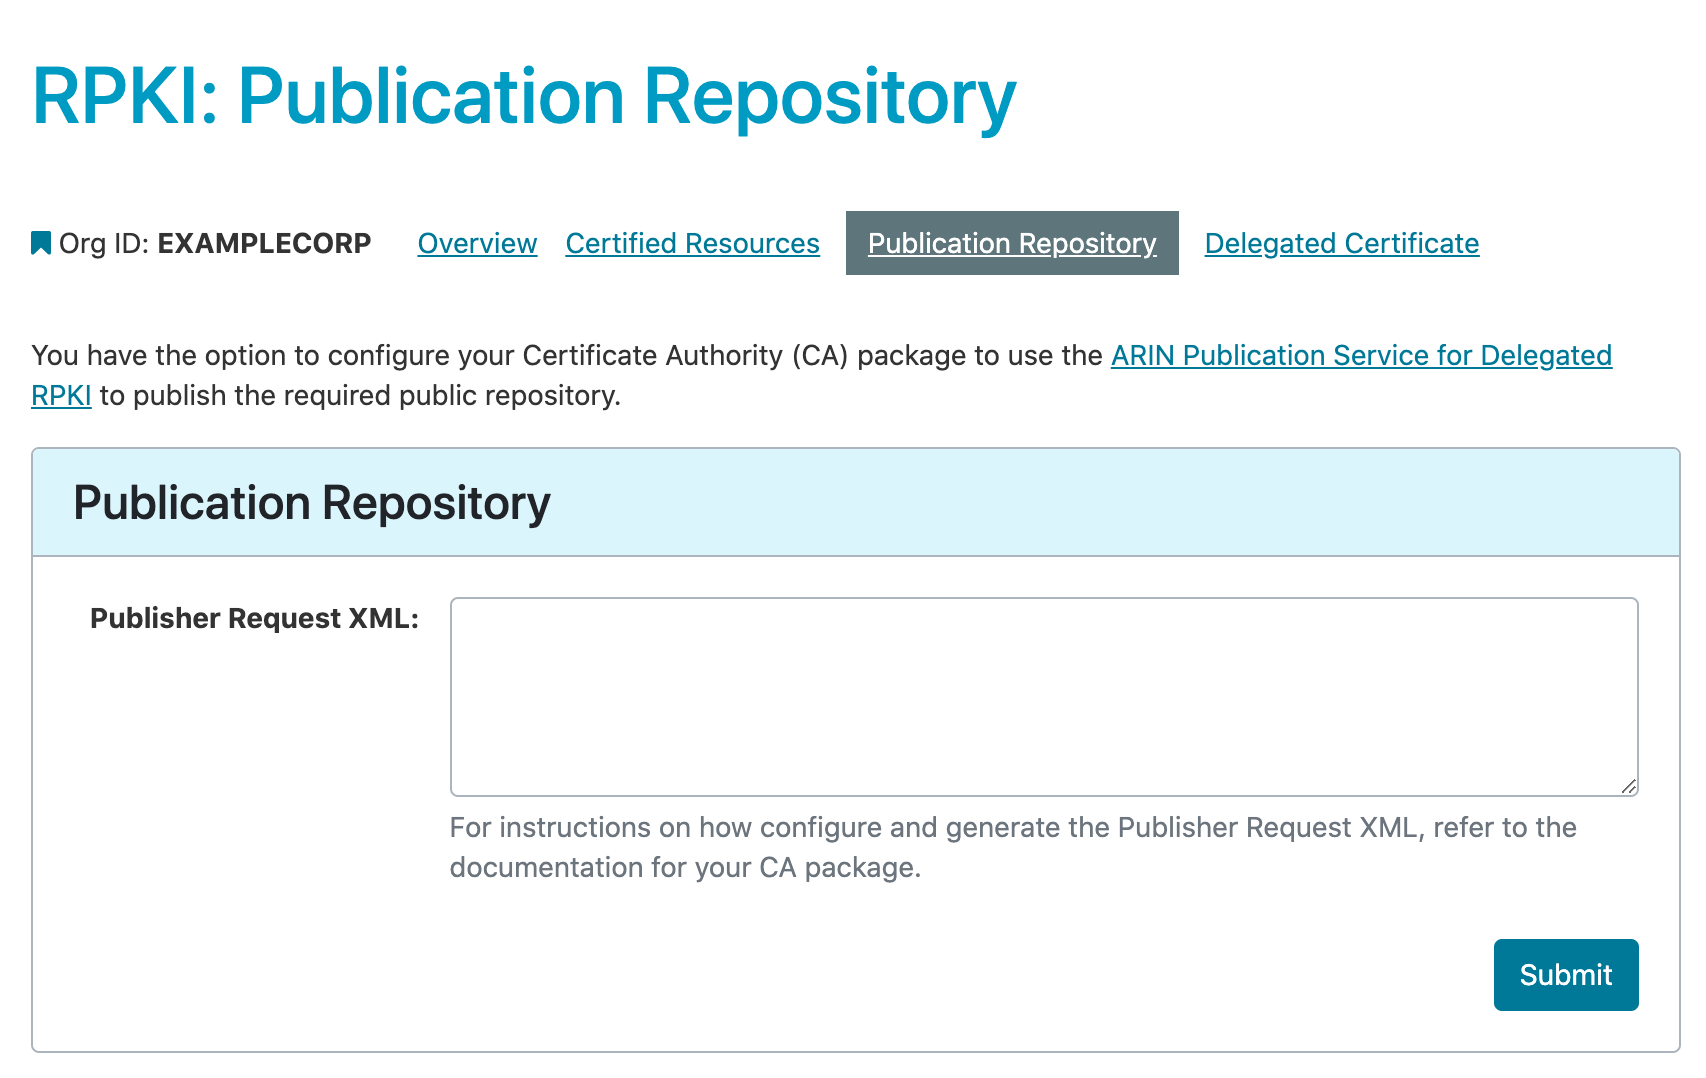 Screen for ARIN Online Publication Repository